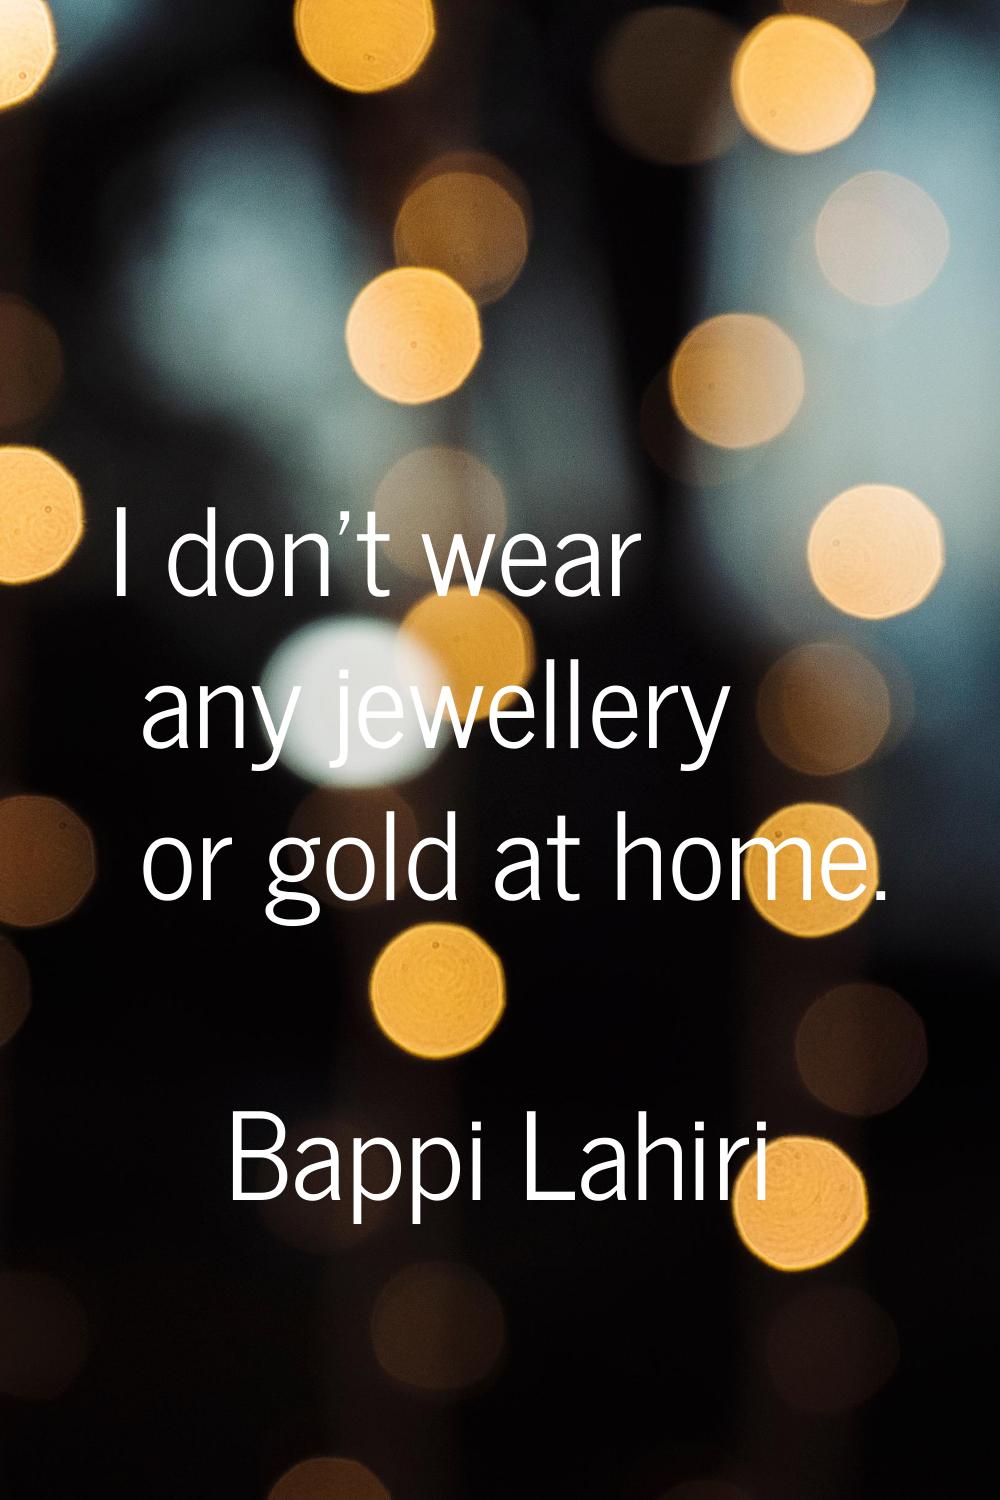 I don't wear any jewellery or gold at home.